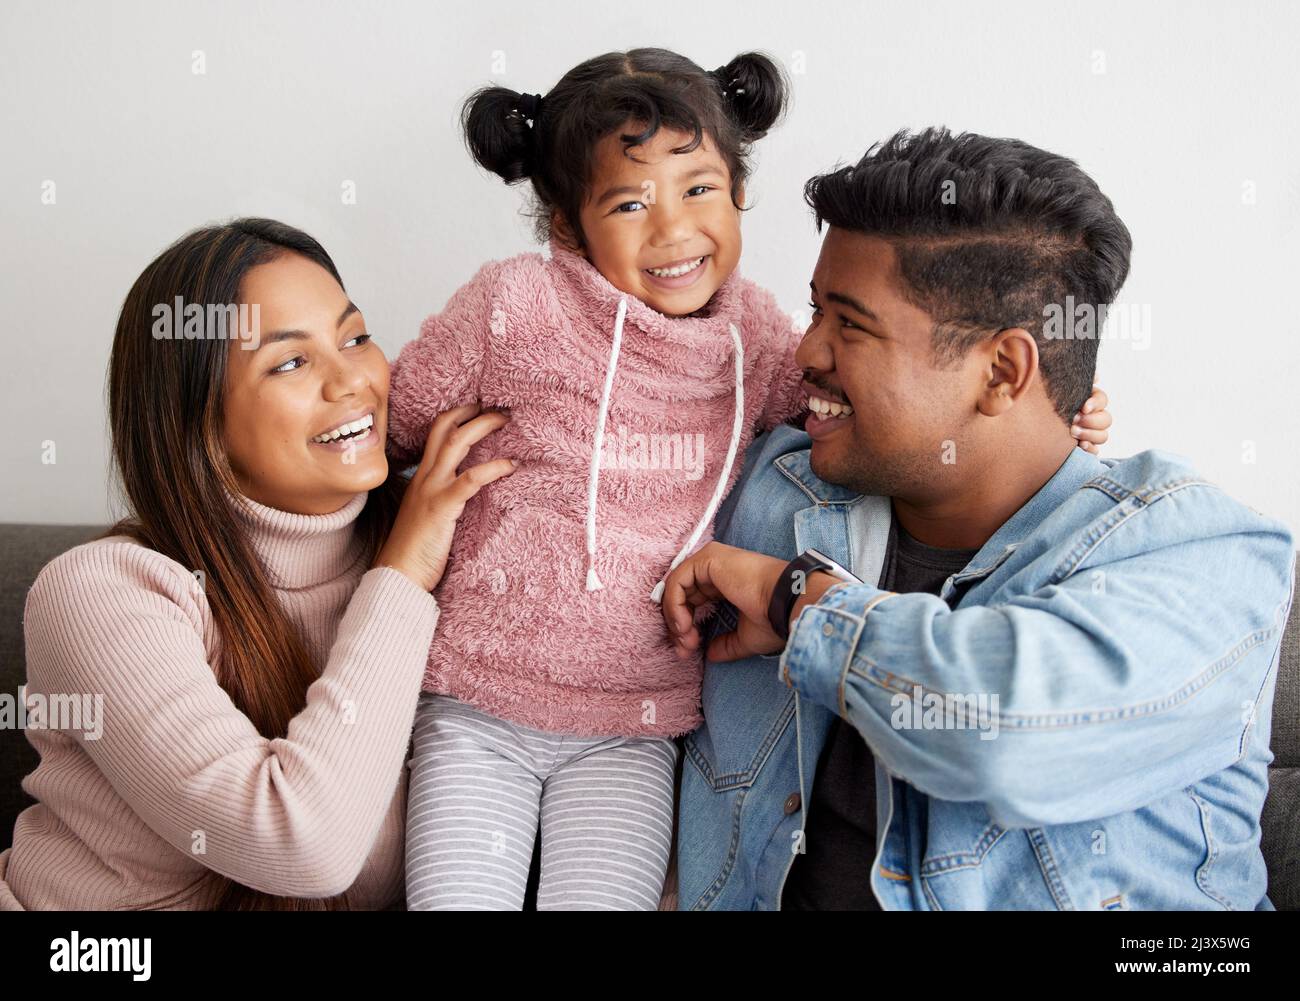 Her giggle is my favourite sound. Shot of parent playfully tickling their daughter. Stock Photo